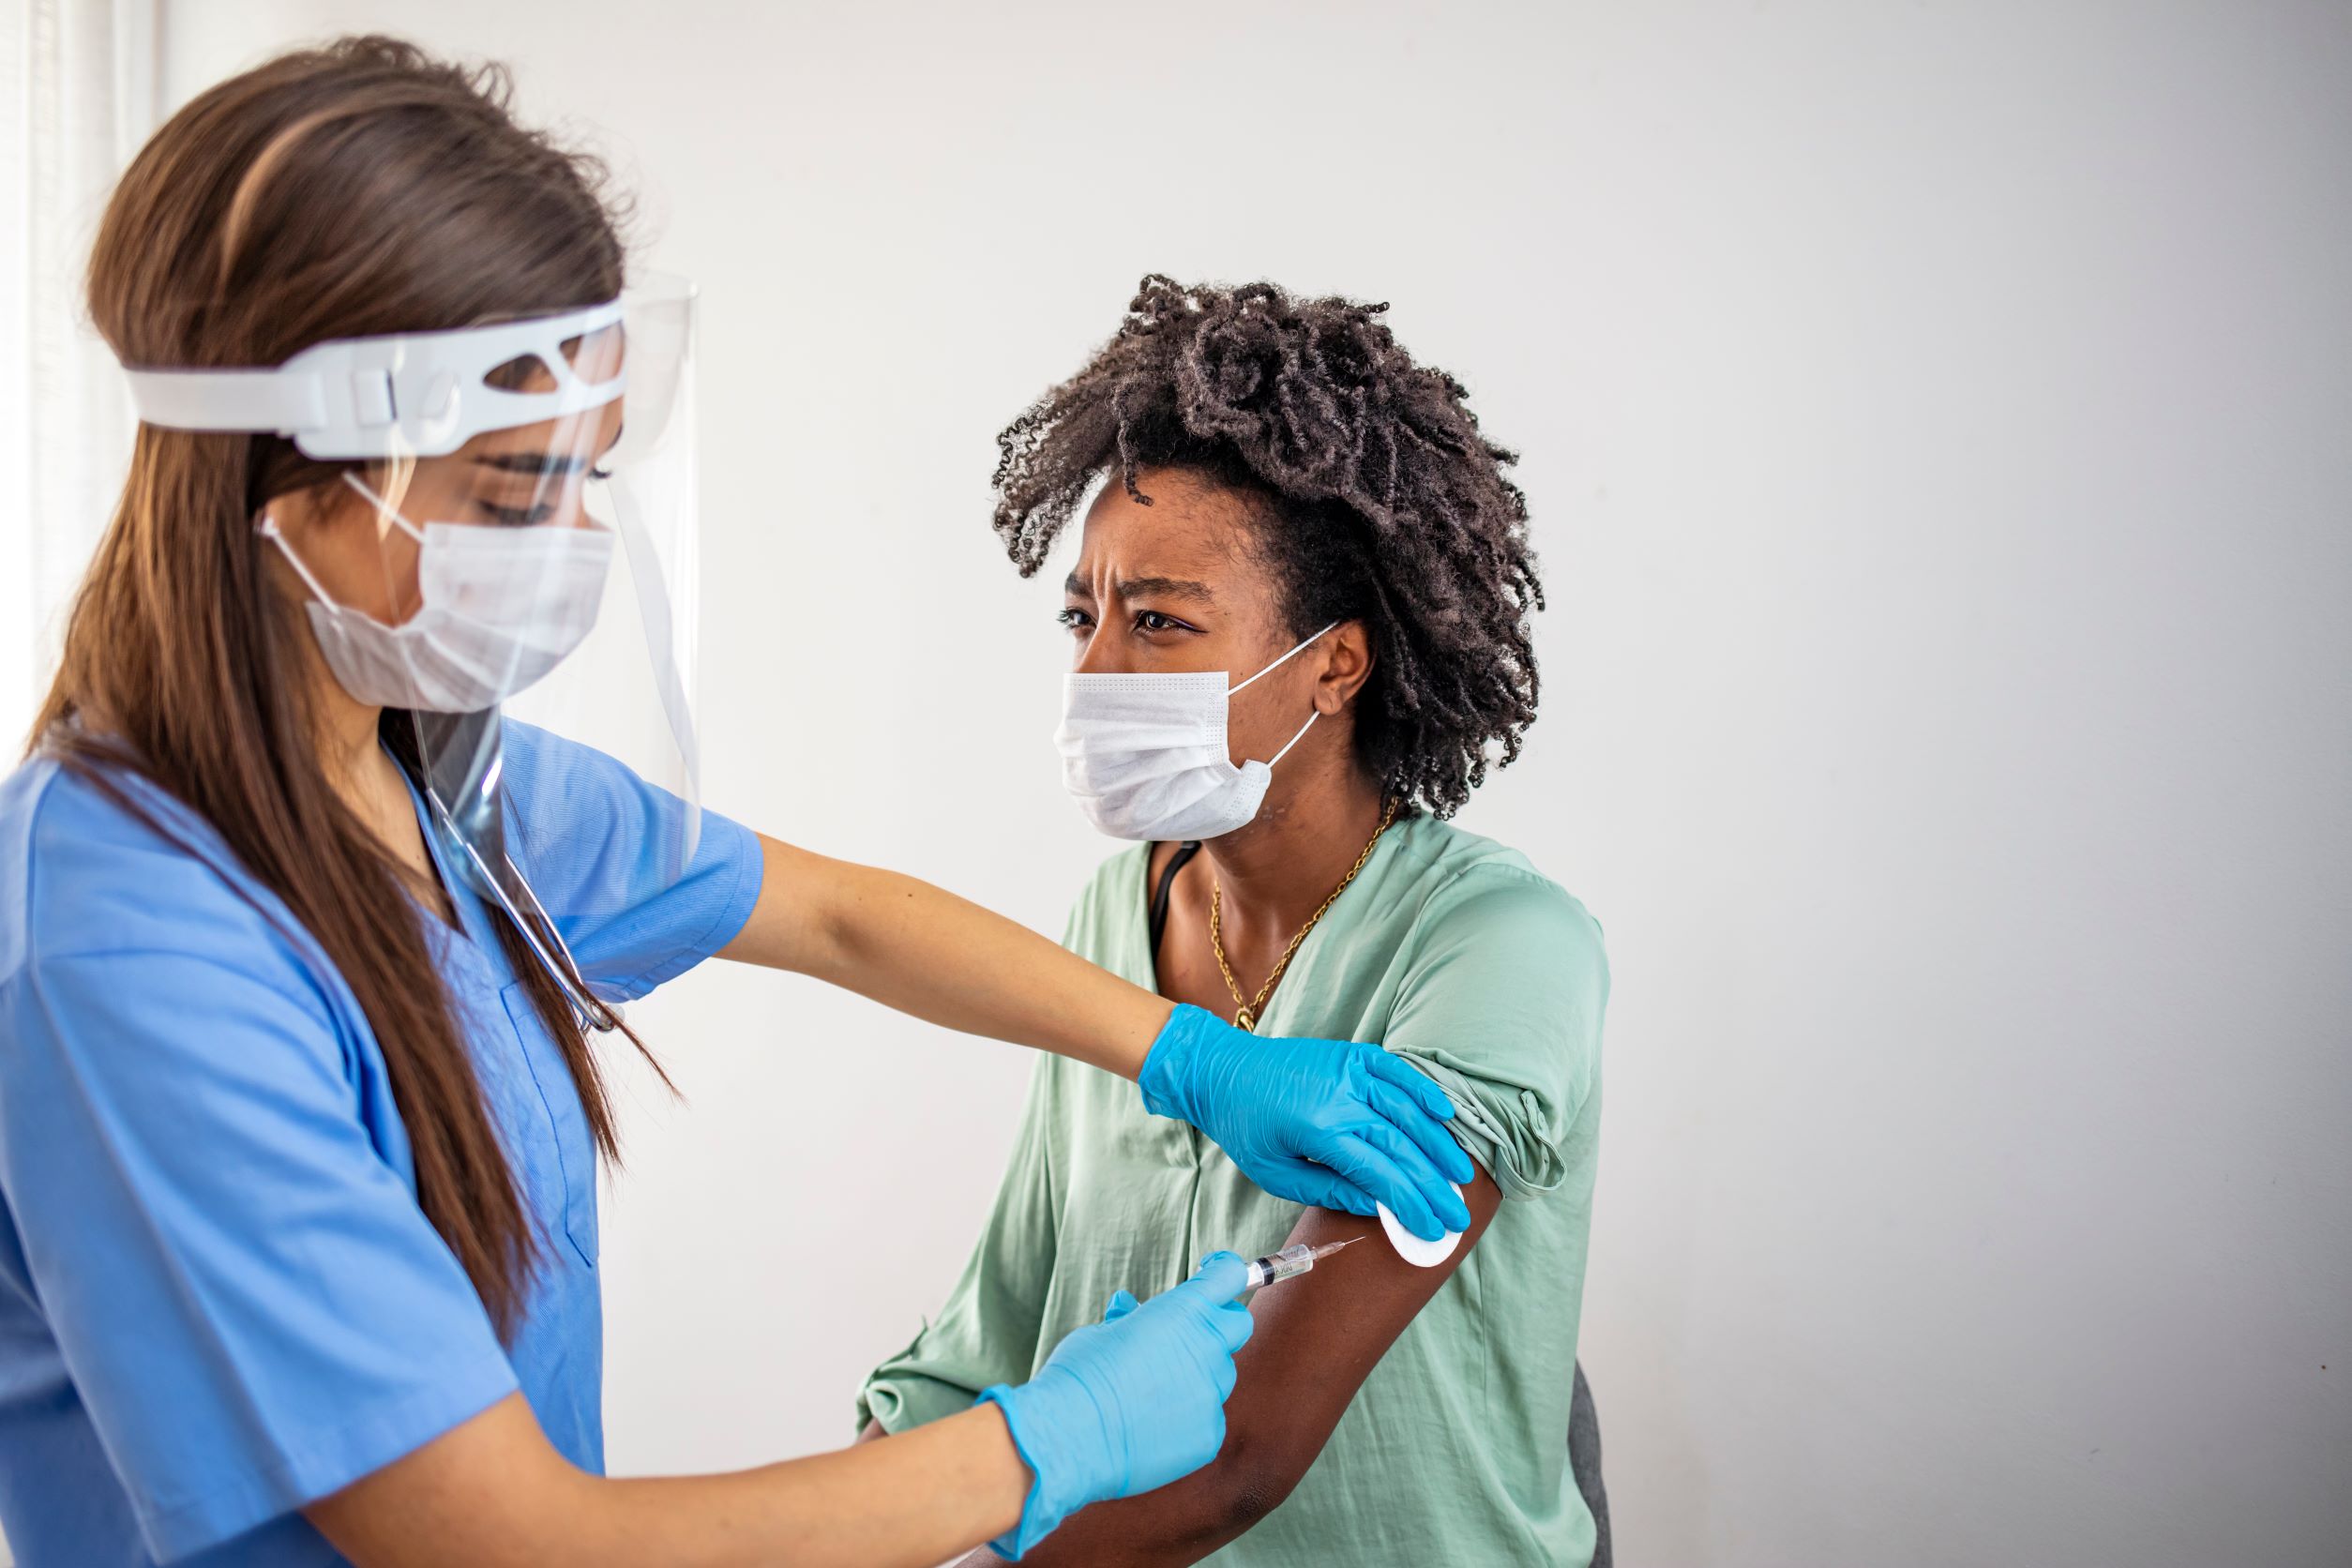 A woman receiving a vaccine while wearing a face mask.